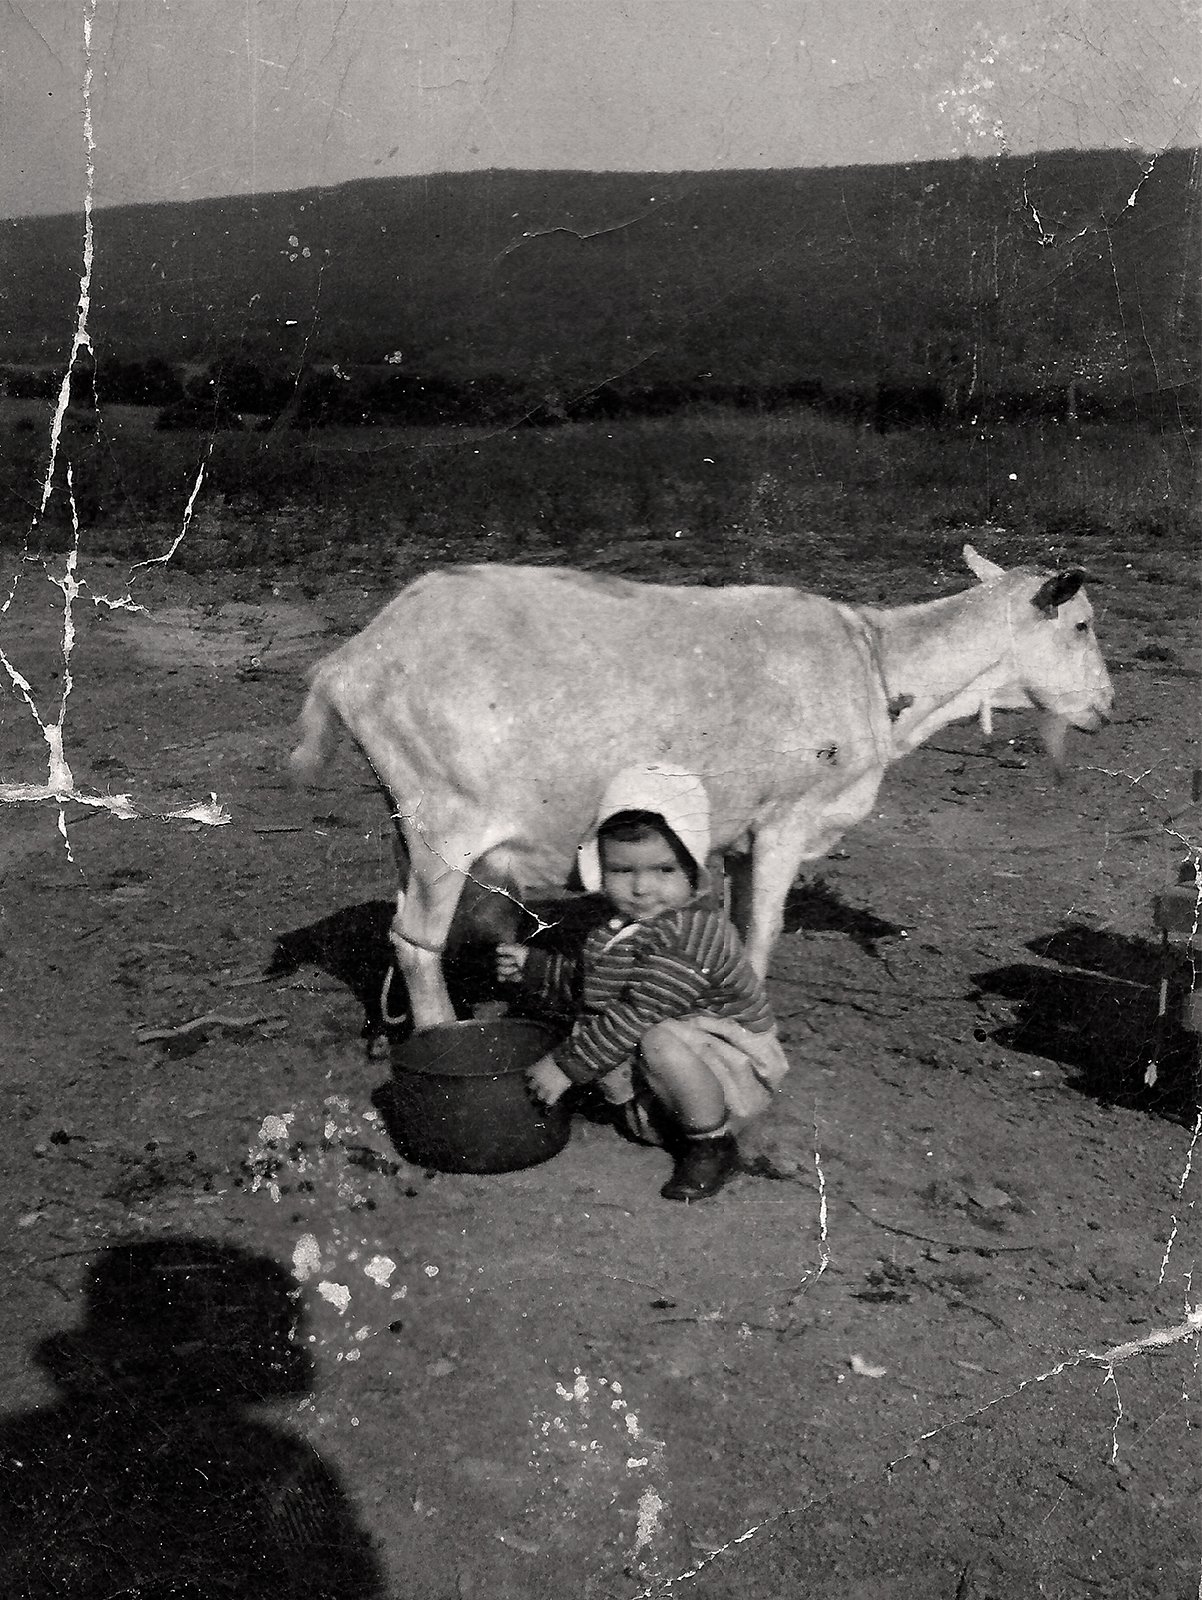 Gretchen as a young child, learning to milk a goat. Cumberland Valley, Pennsylvania, c. 1940s.